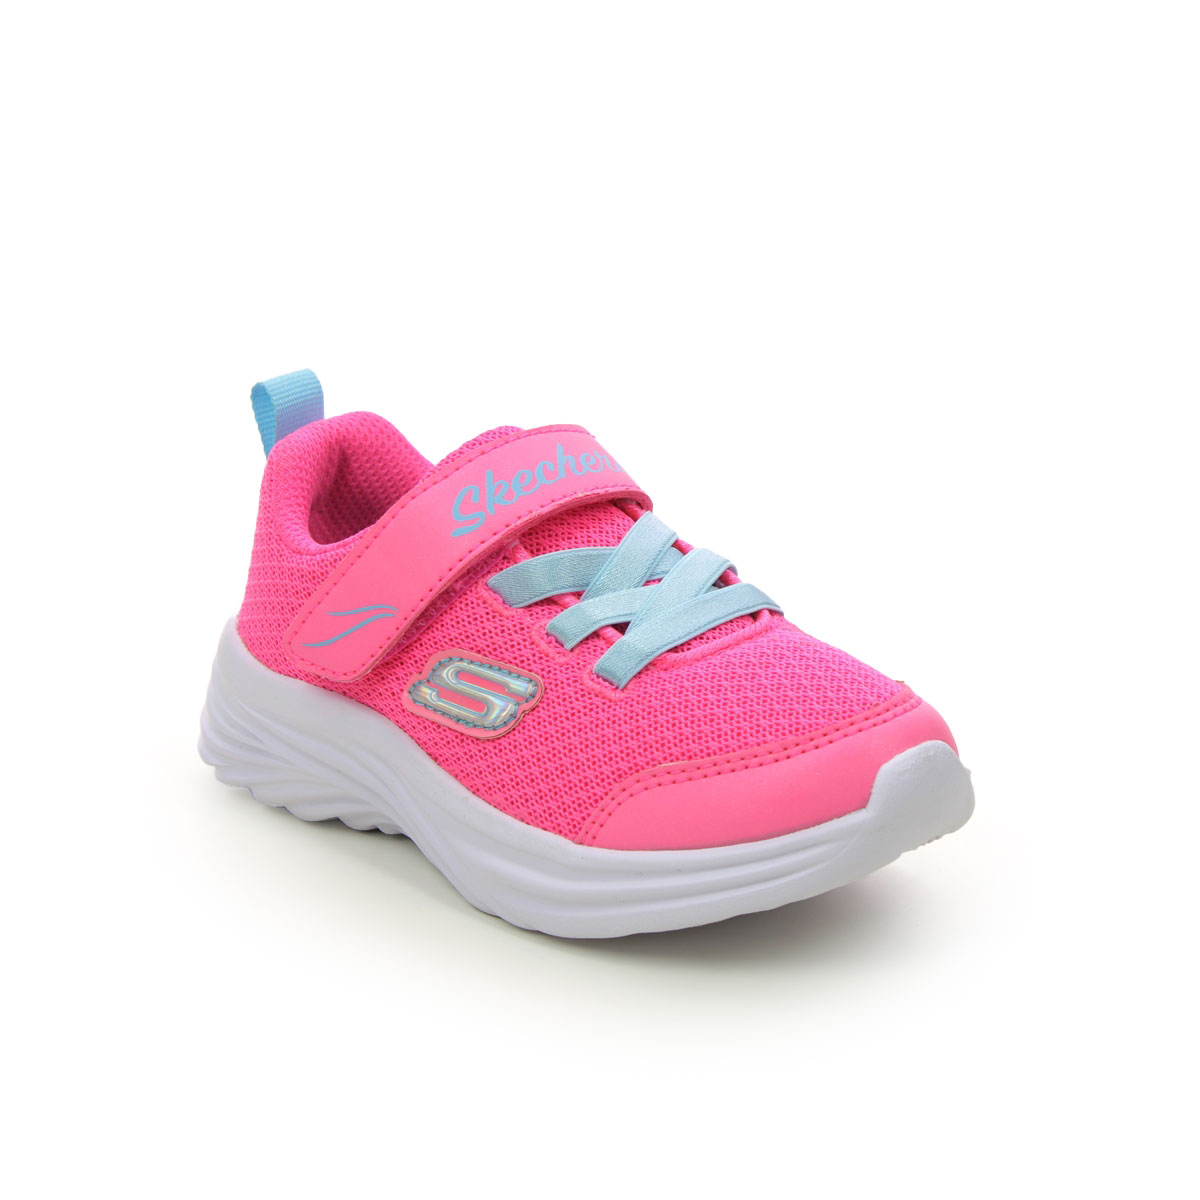 Skechers Dreamy Dancer Infant Pink Turquoise Kids Girls Trainers 302450N In Size 21 In Plain Pink Turquoise